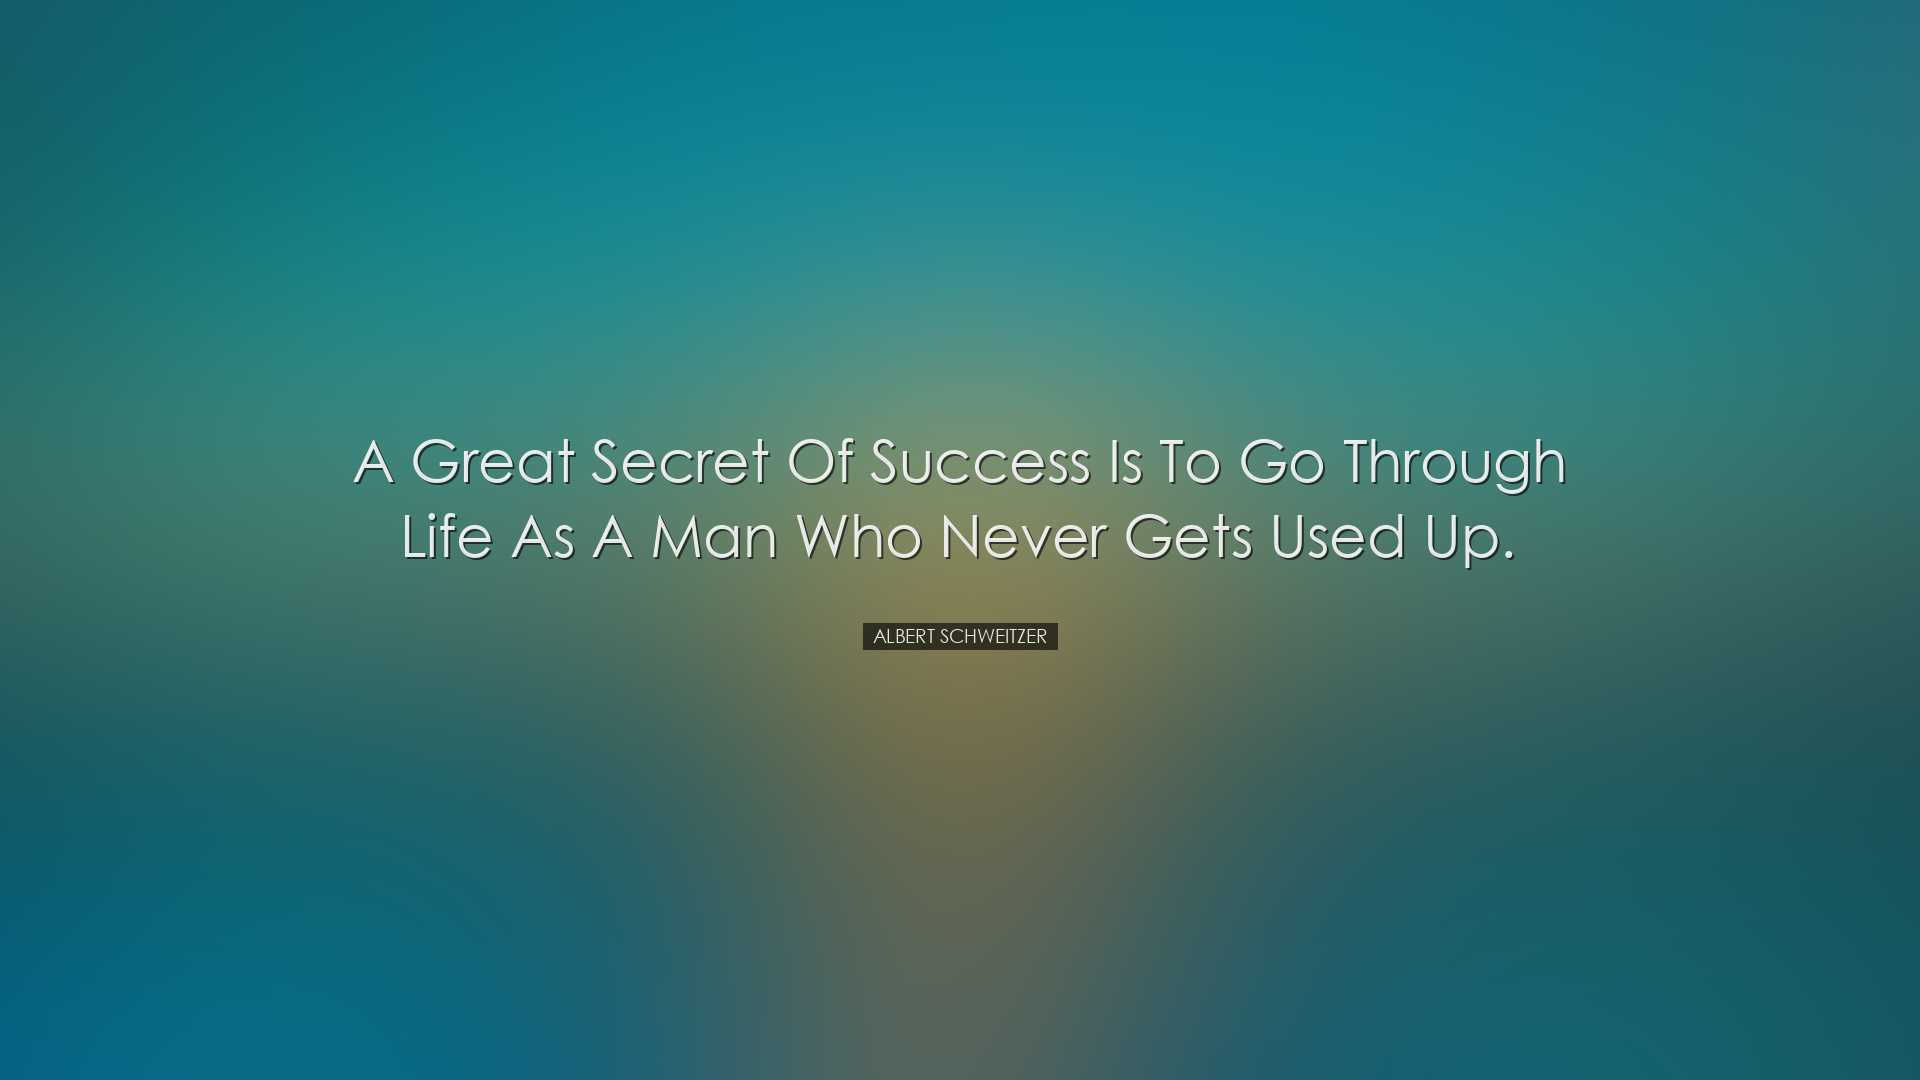 A great secret of success is to go through life as a man who never